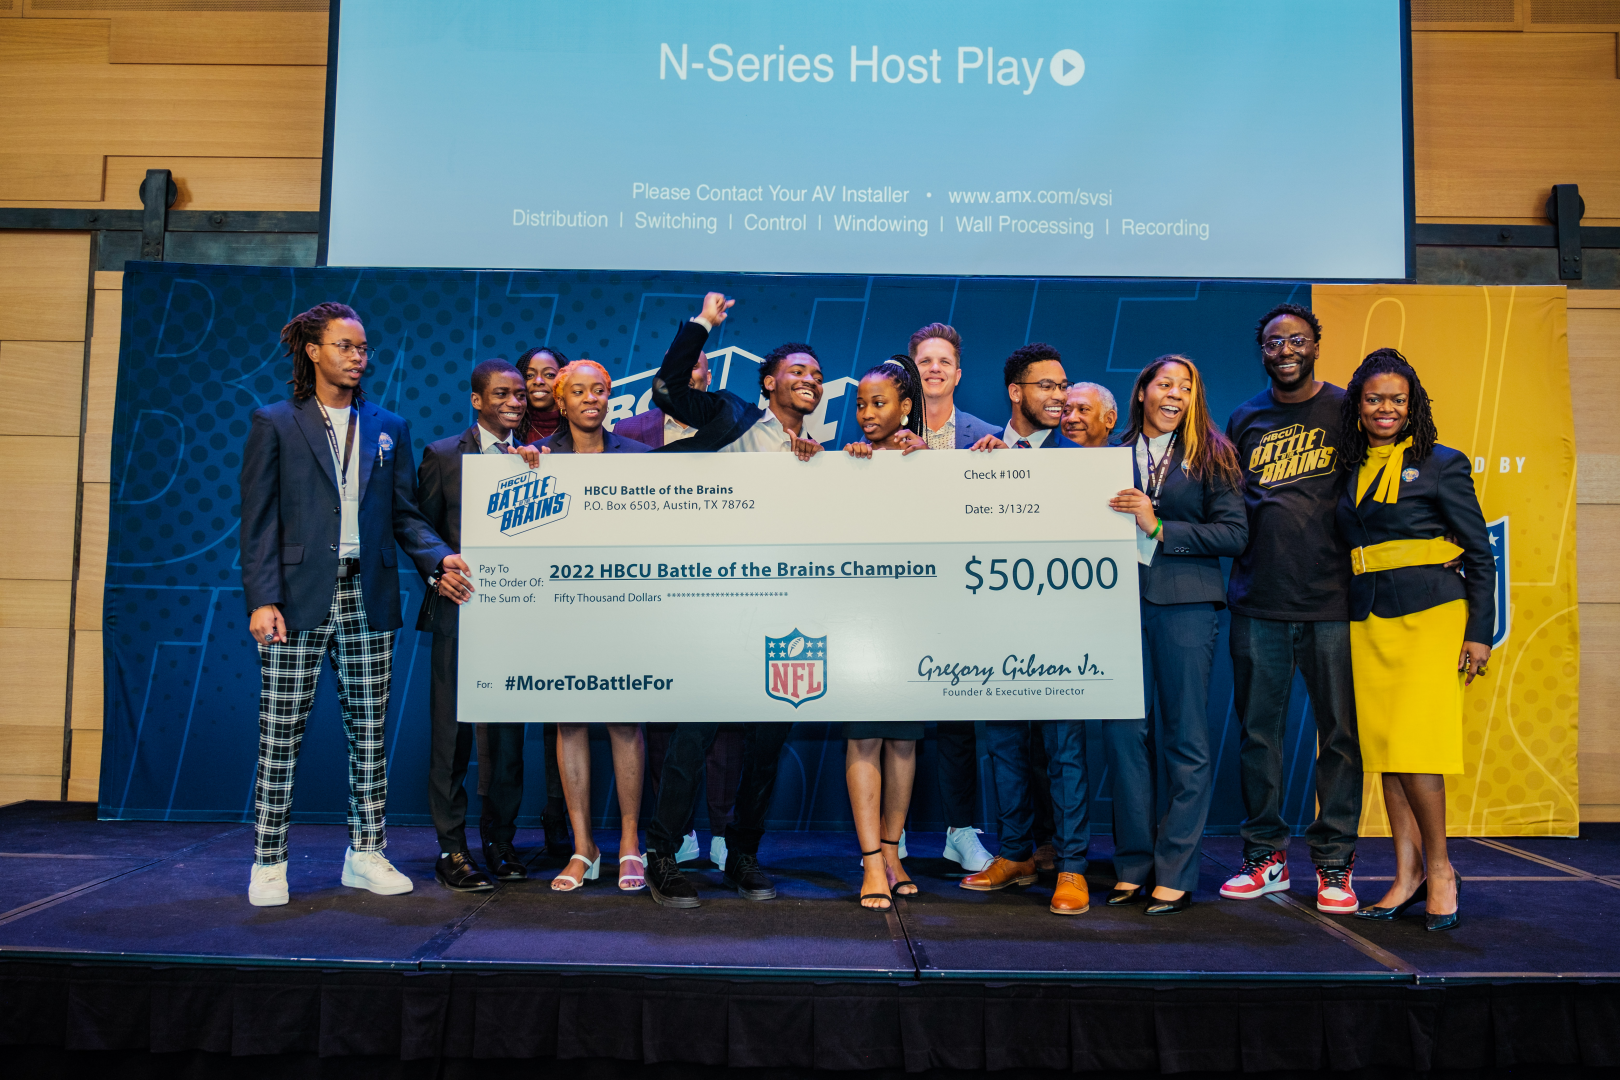 Black intelligence celebrated as NFL hosts 5th annual HBCU Battle of the Brains